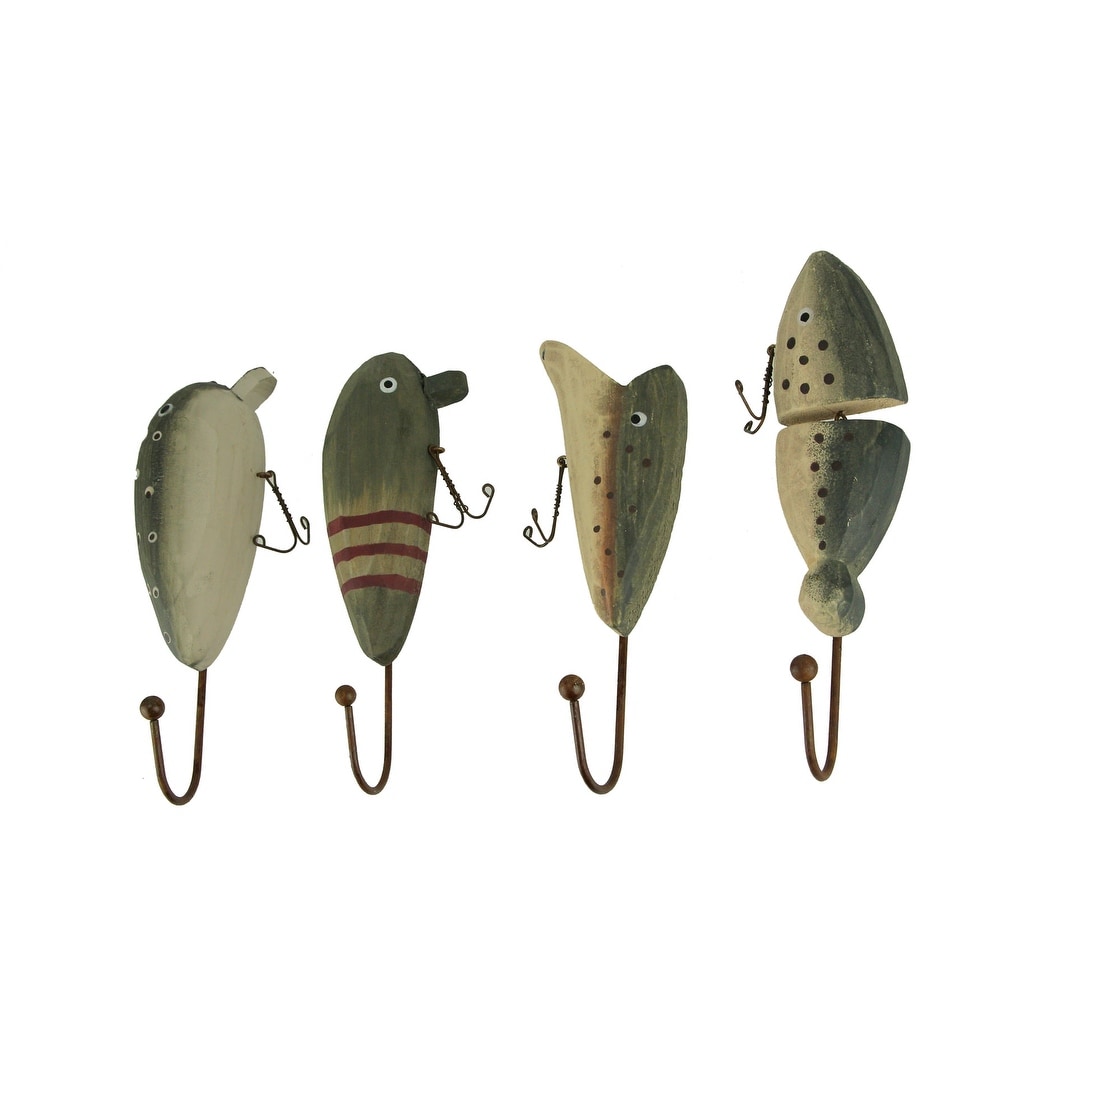 Rustic Wooden Vintage Fishing Lure Wall Hooks Set Of 4 - 7.25 X 2.5 X 1.75  inches